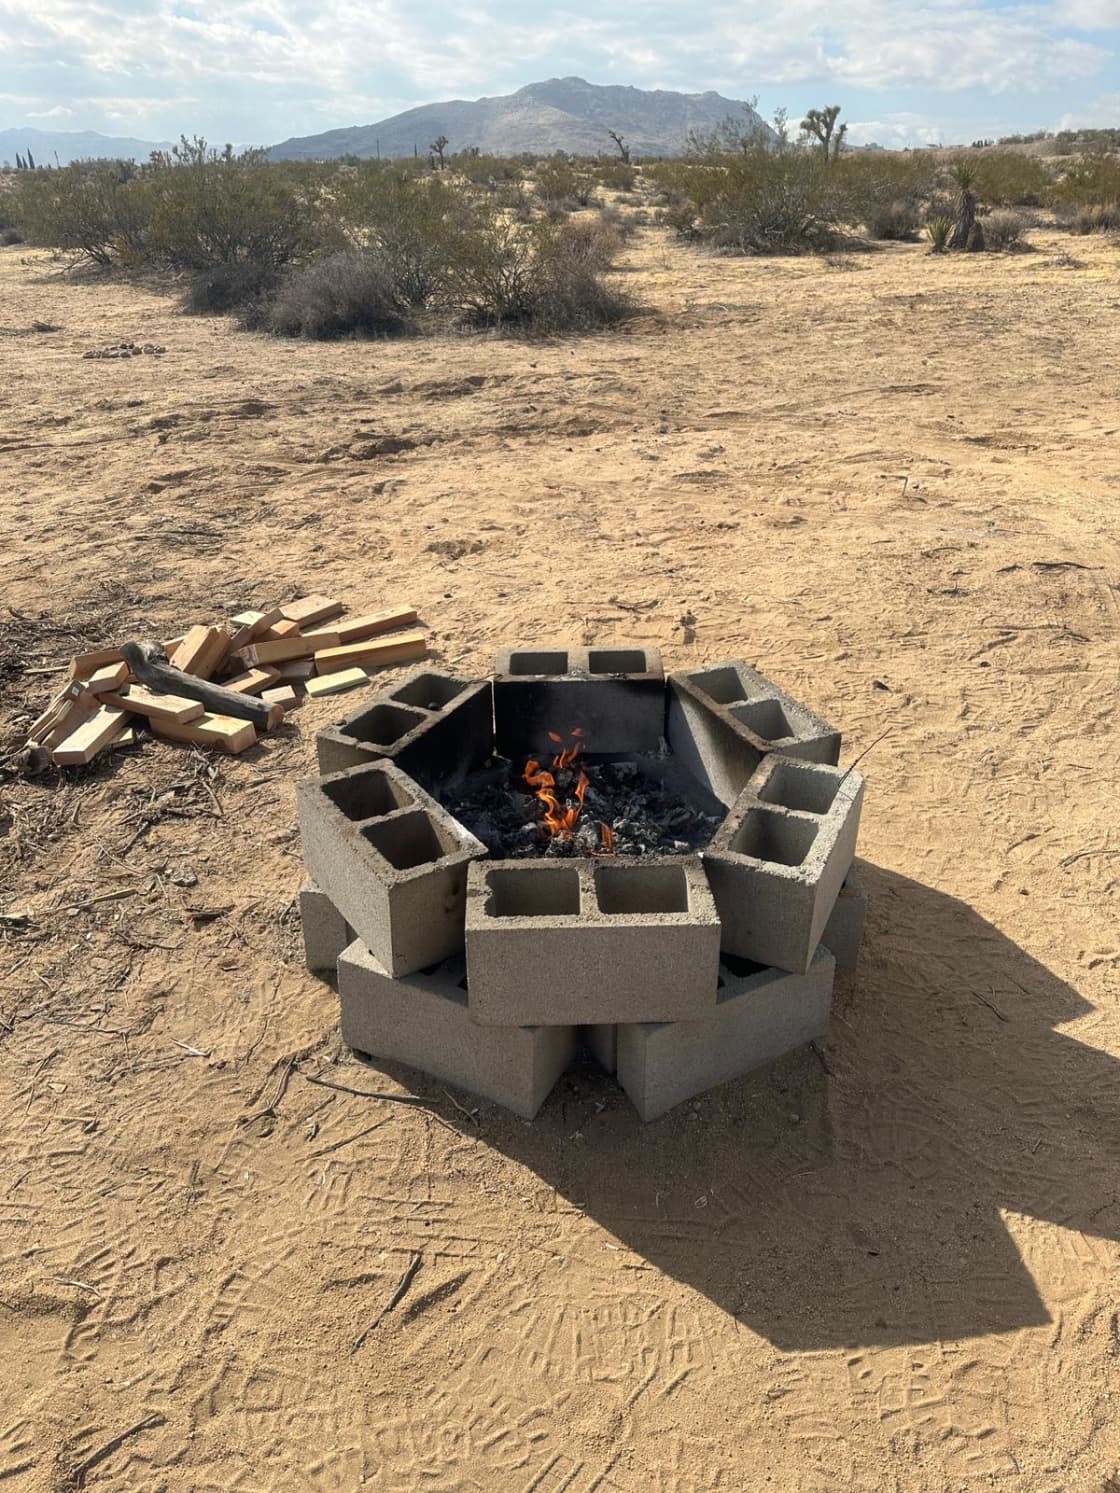 "As Joseph had prepared the firewood for the campfire, we made sure to stock up on good kindling before heading out. Hurry to take advantage of this cozy space and enjoy the beautiful desert sky next to the fire!  😉